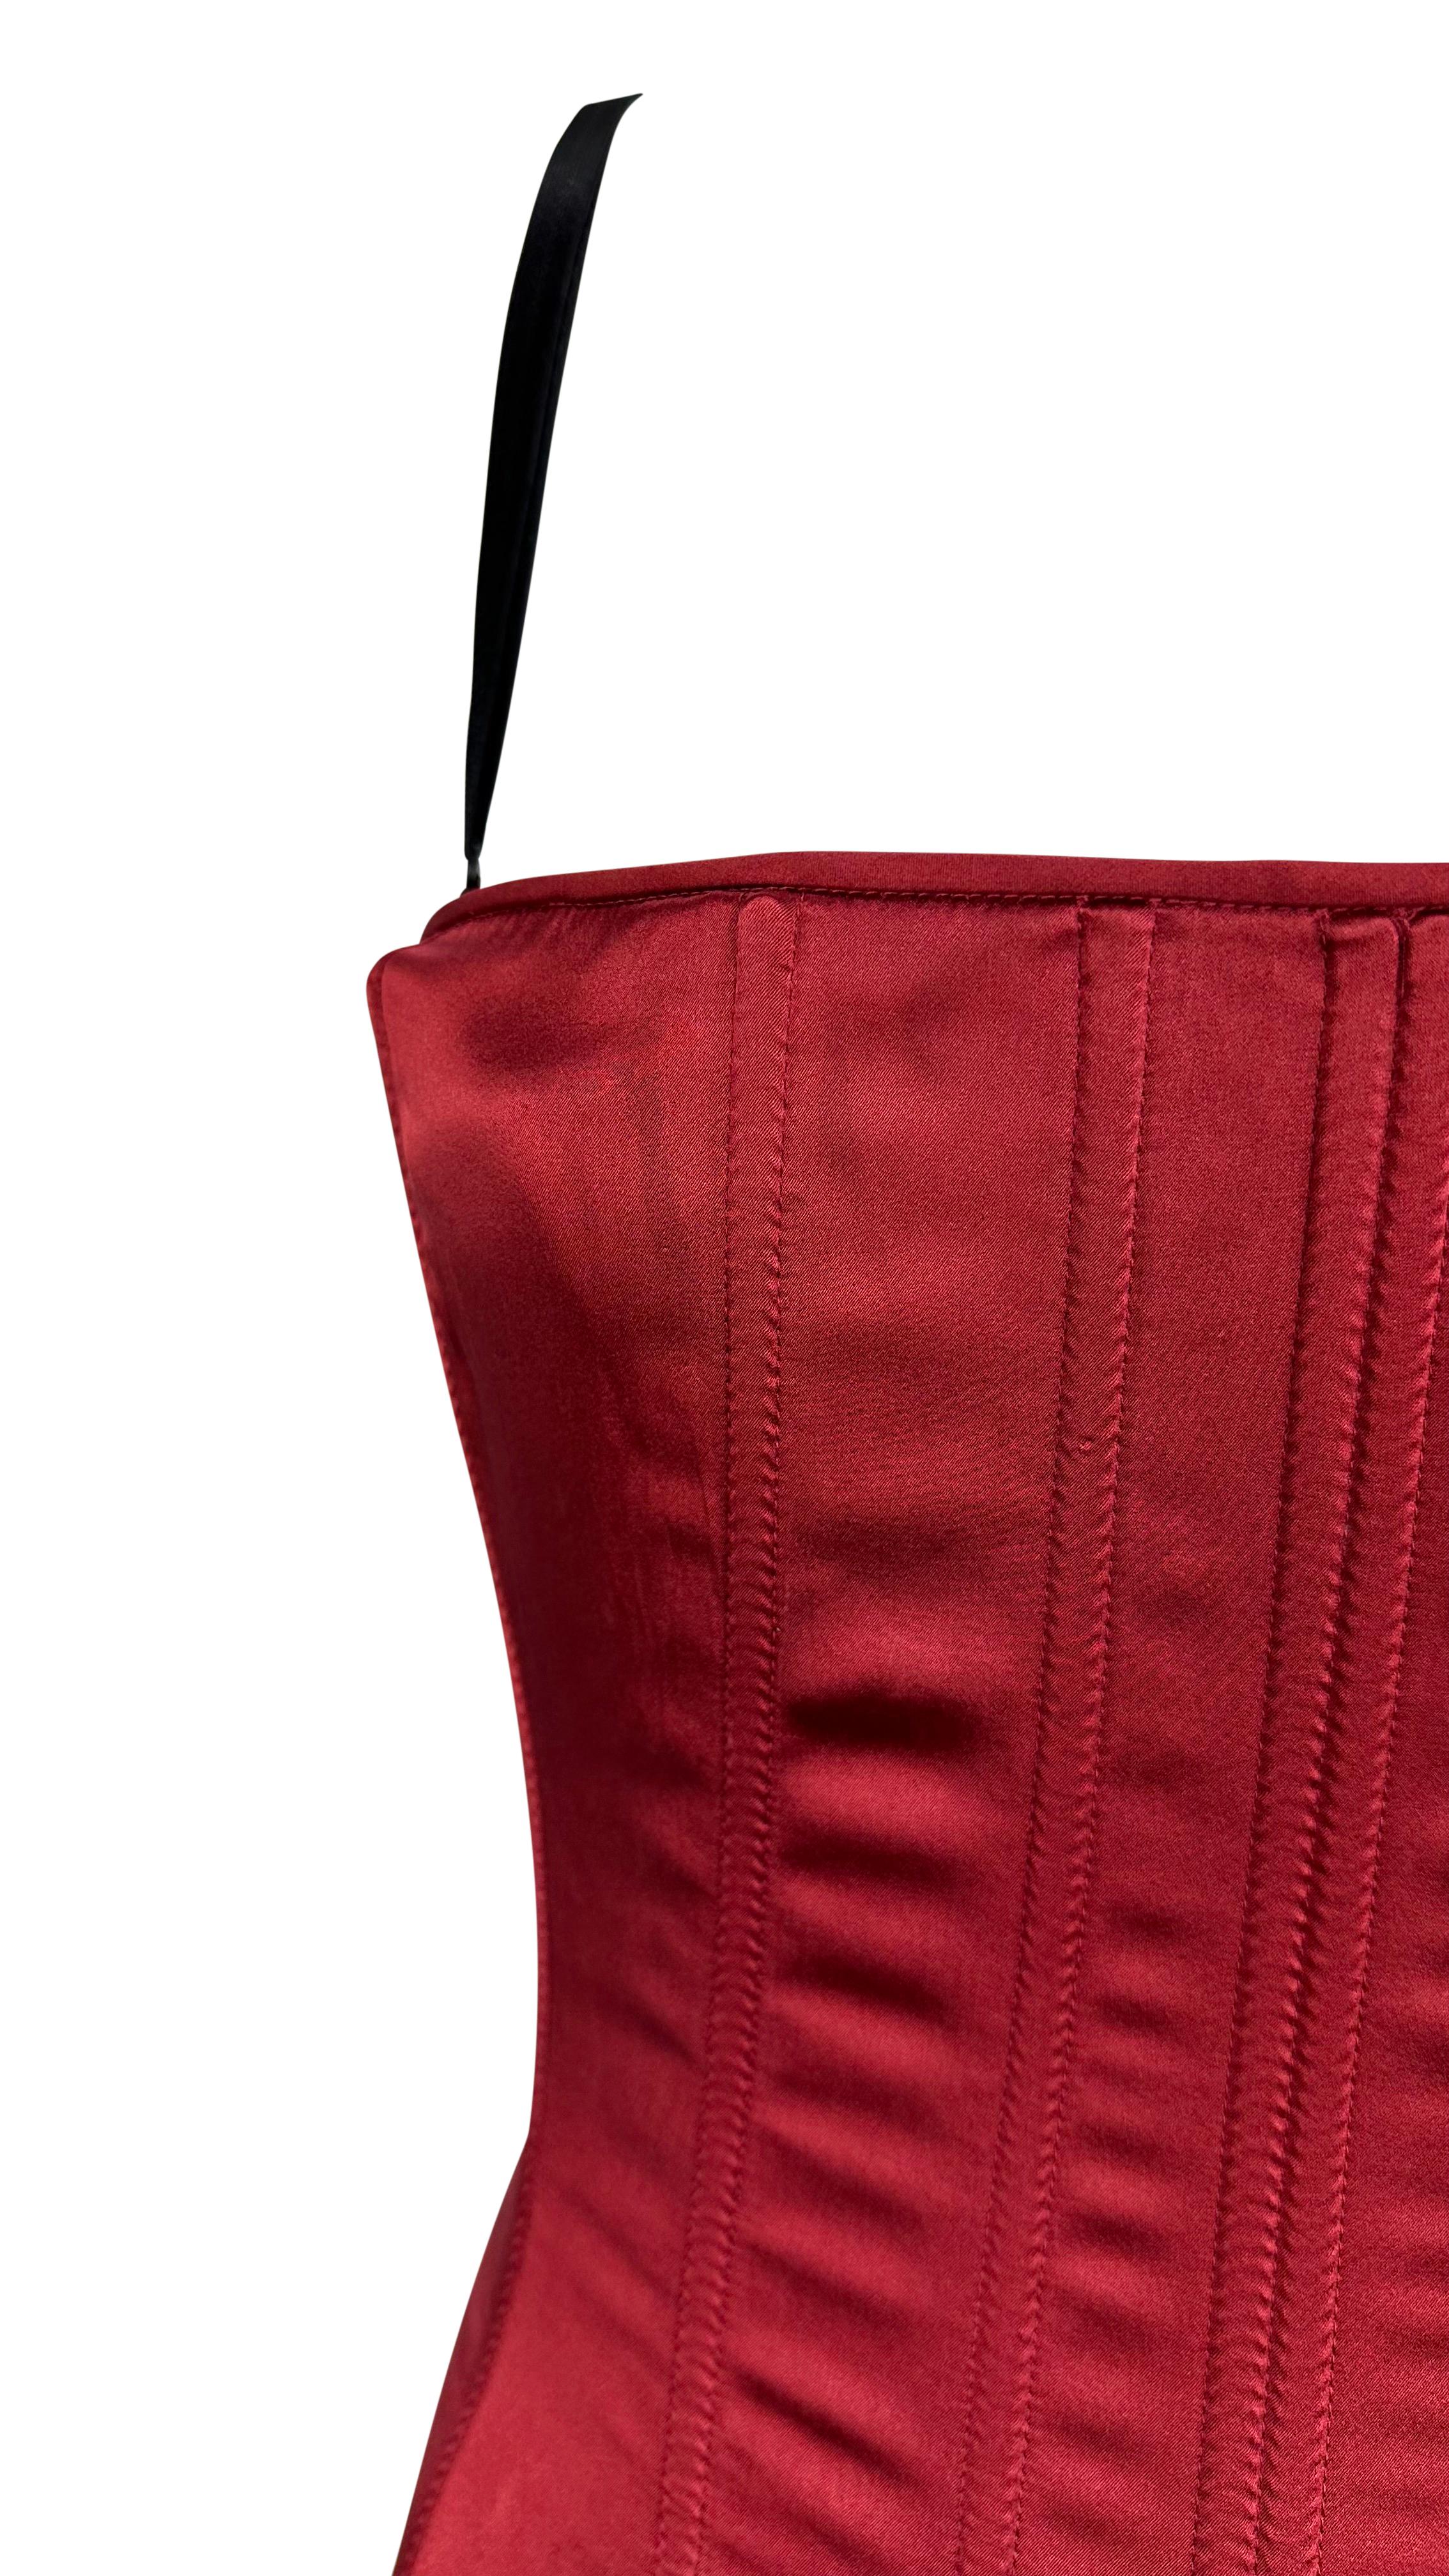 Presenting a fabulous red silk satin Dolce and Gabbana corset. From the late 1990s/early 2000s this top is crafted with meticulous attention to detail, this deep red masterpiece envelops you in the luxurious embrace of silk satin. With boning for